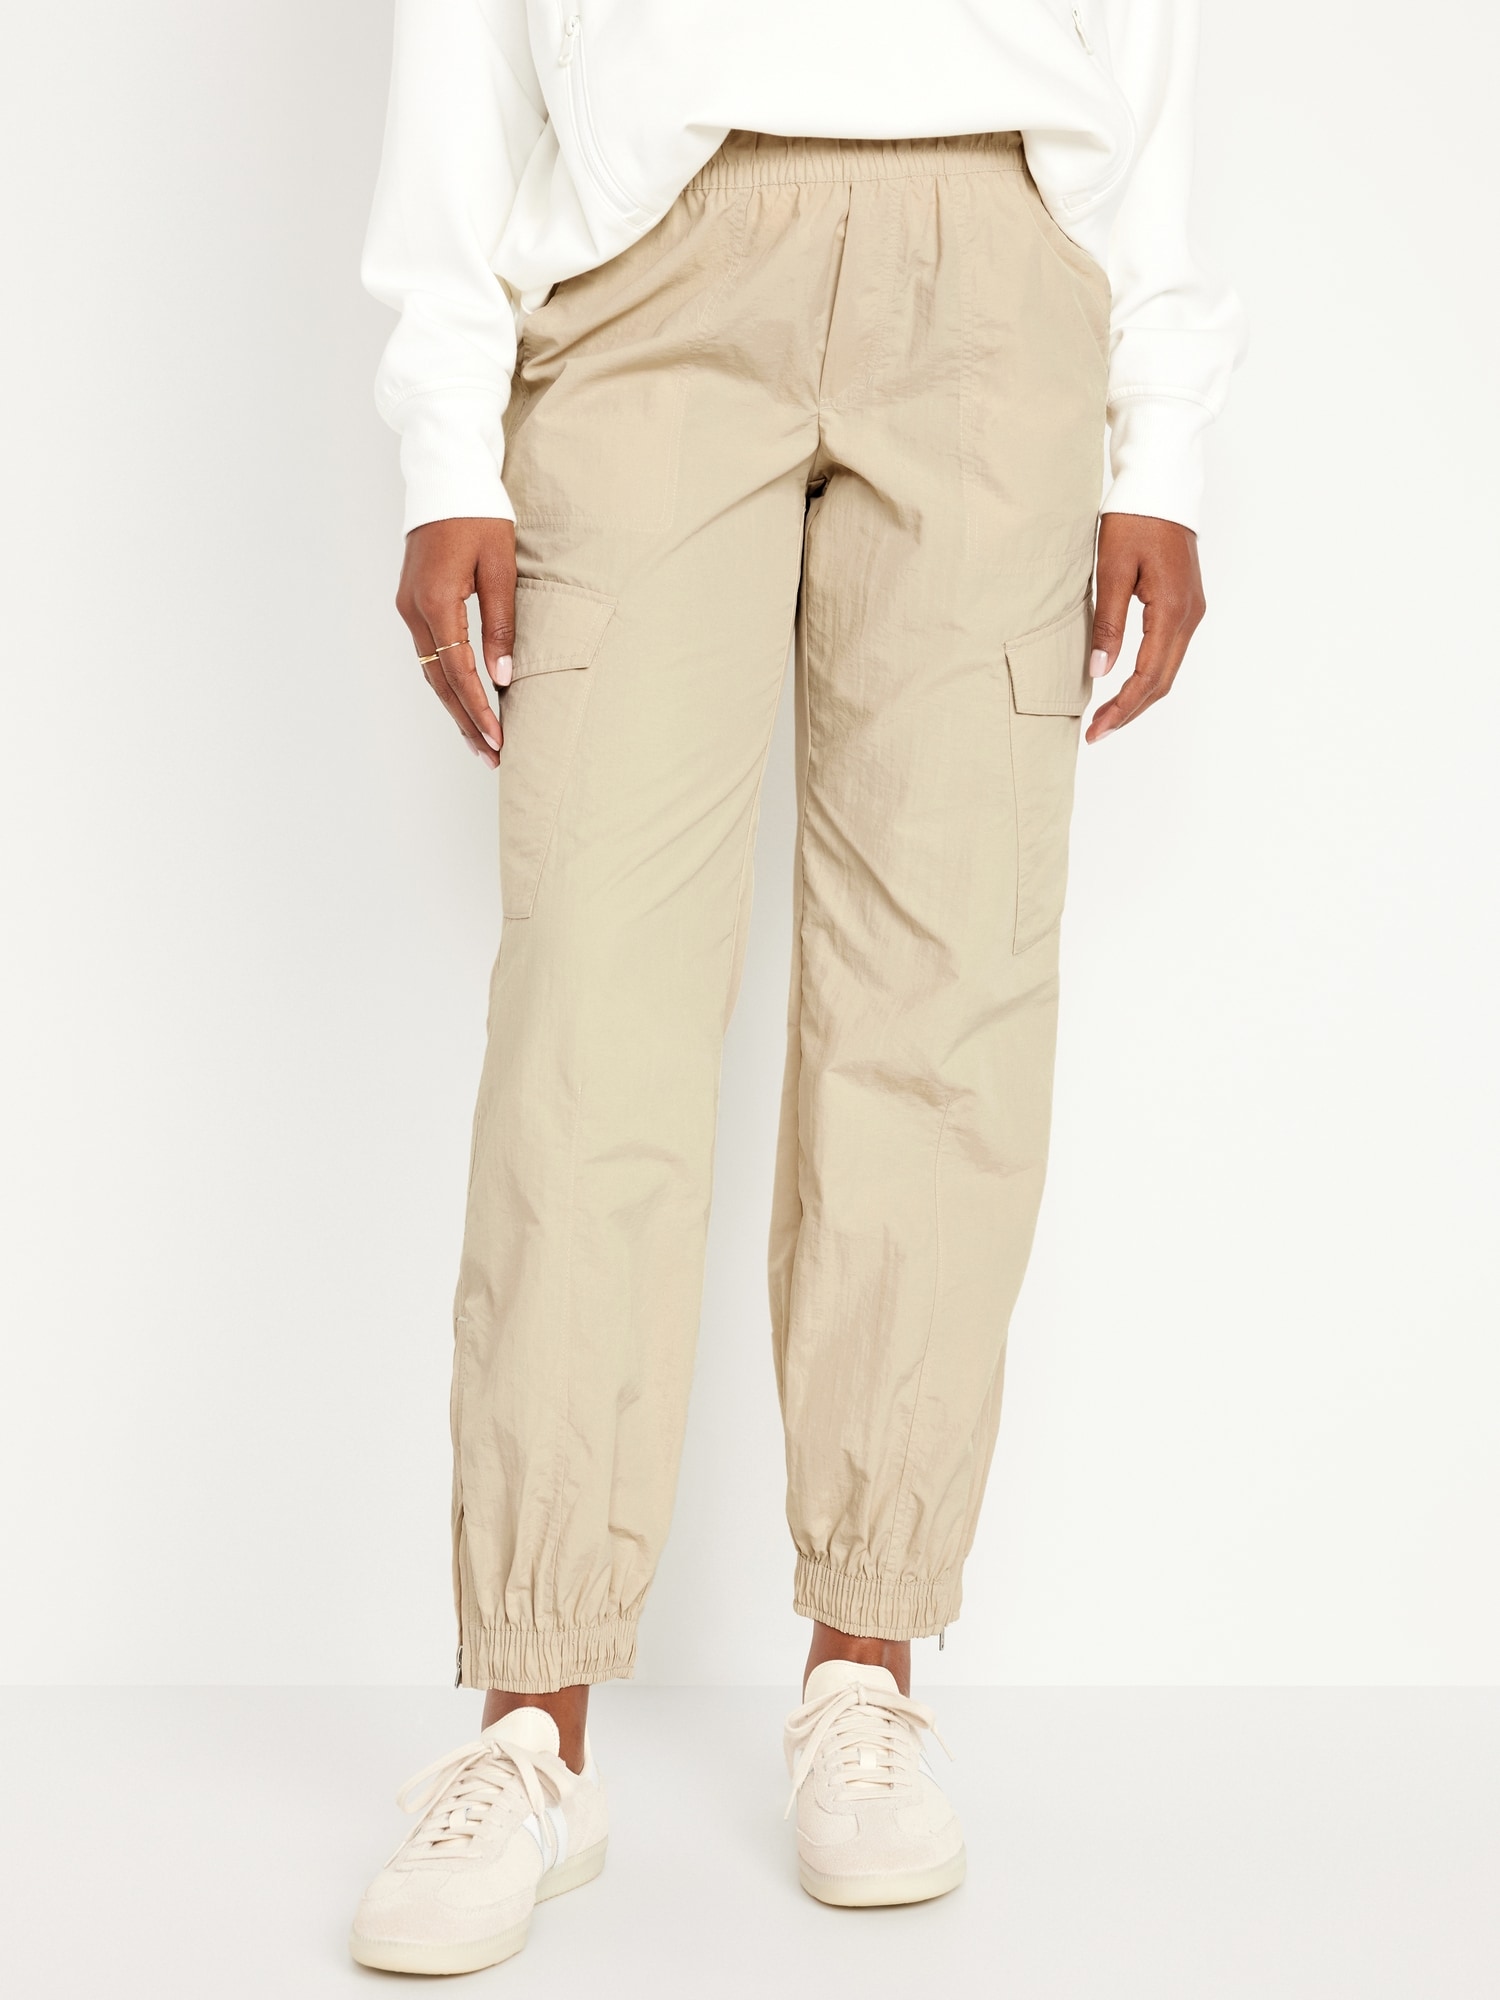 Jogging Pants With Zipper Fly